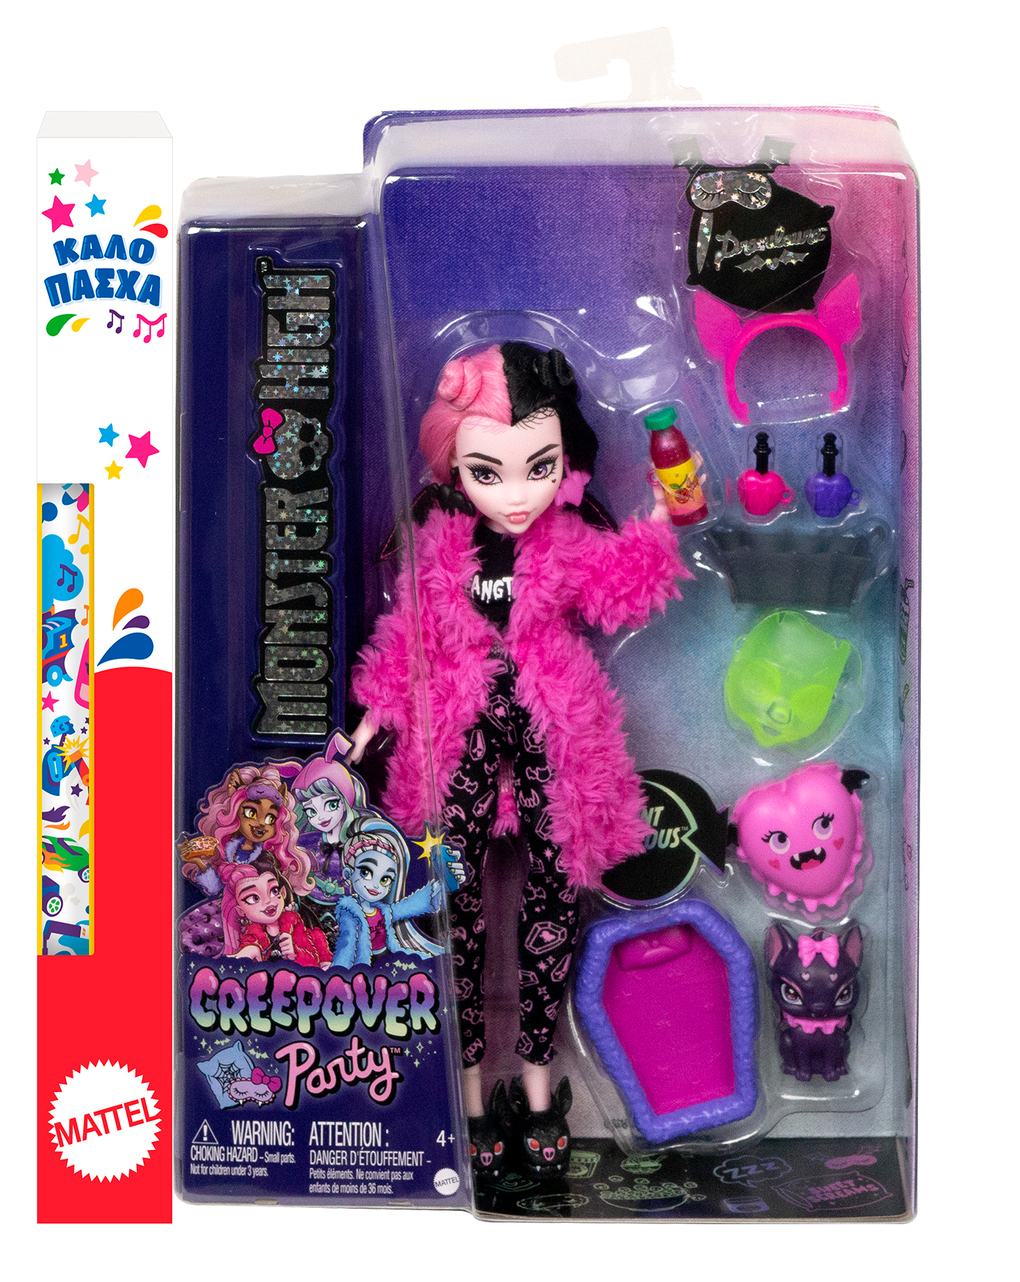 Monster high λαμπάδα κούκλα και αξεσουάρ ντρακουλόρα hky66 - MONSTER HIGH